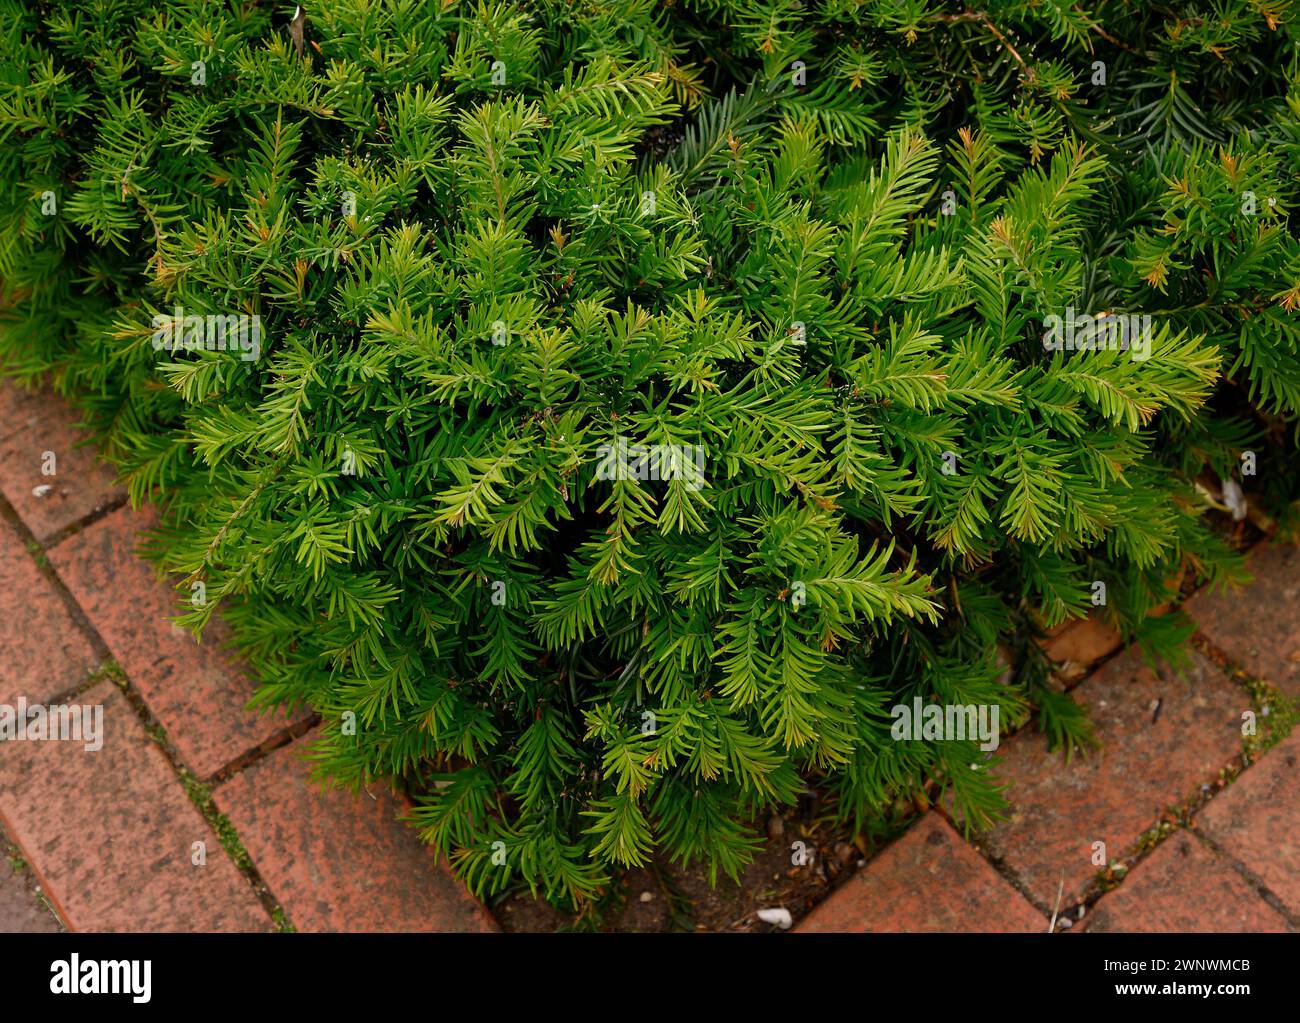 Closeup of the low growing and spreading green leaves of the evergreen garden groundcover plant taxus baccata repandens. Stock Photo